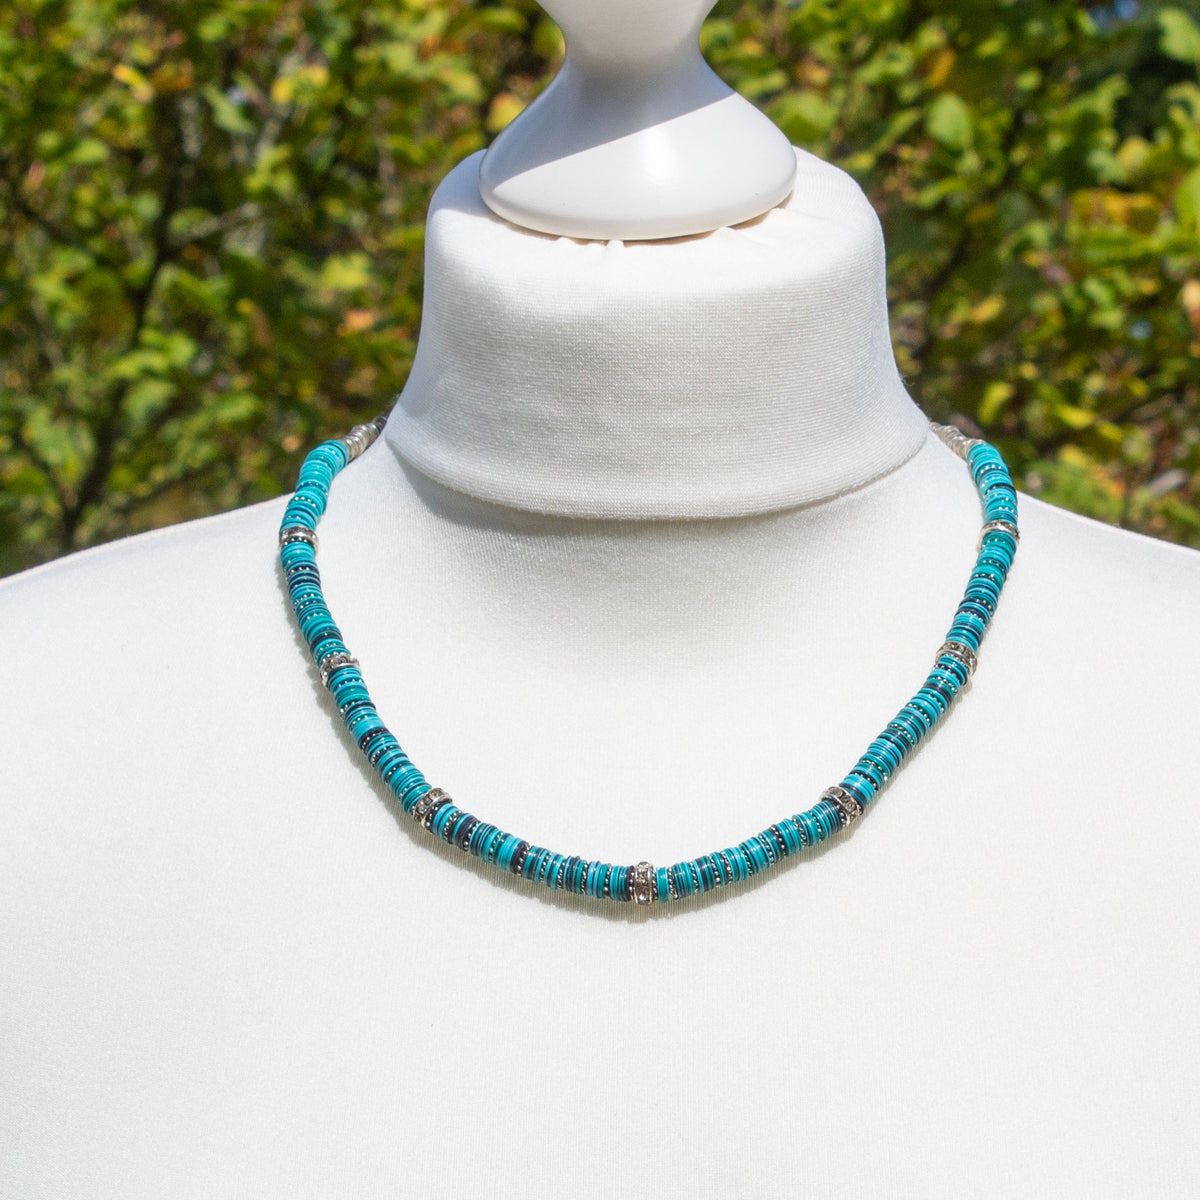 Turquoise/Blue Sequin Necklace | Necklace - The Naughty Shrew